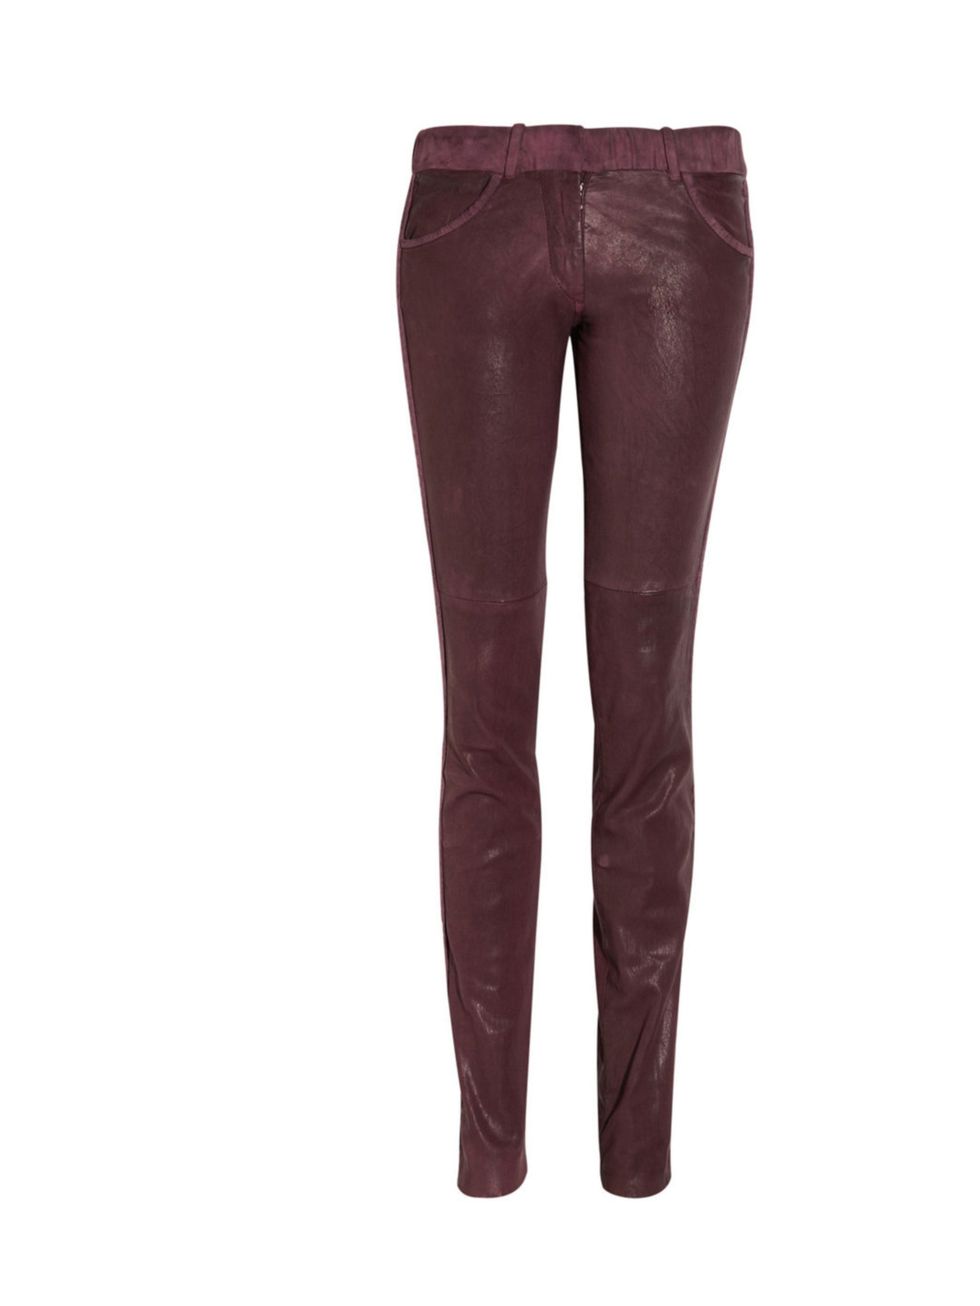 <p>Isabel Marant skinny leather trousers, was £1595 now £797.50, at <a href="http://www.theoutnet.com/">The Outnet</a></p>